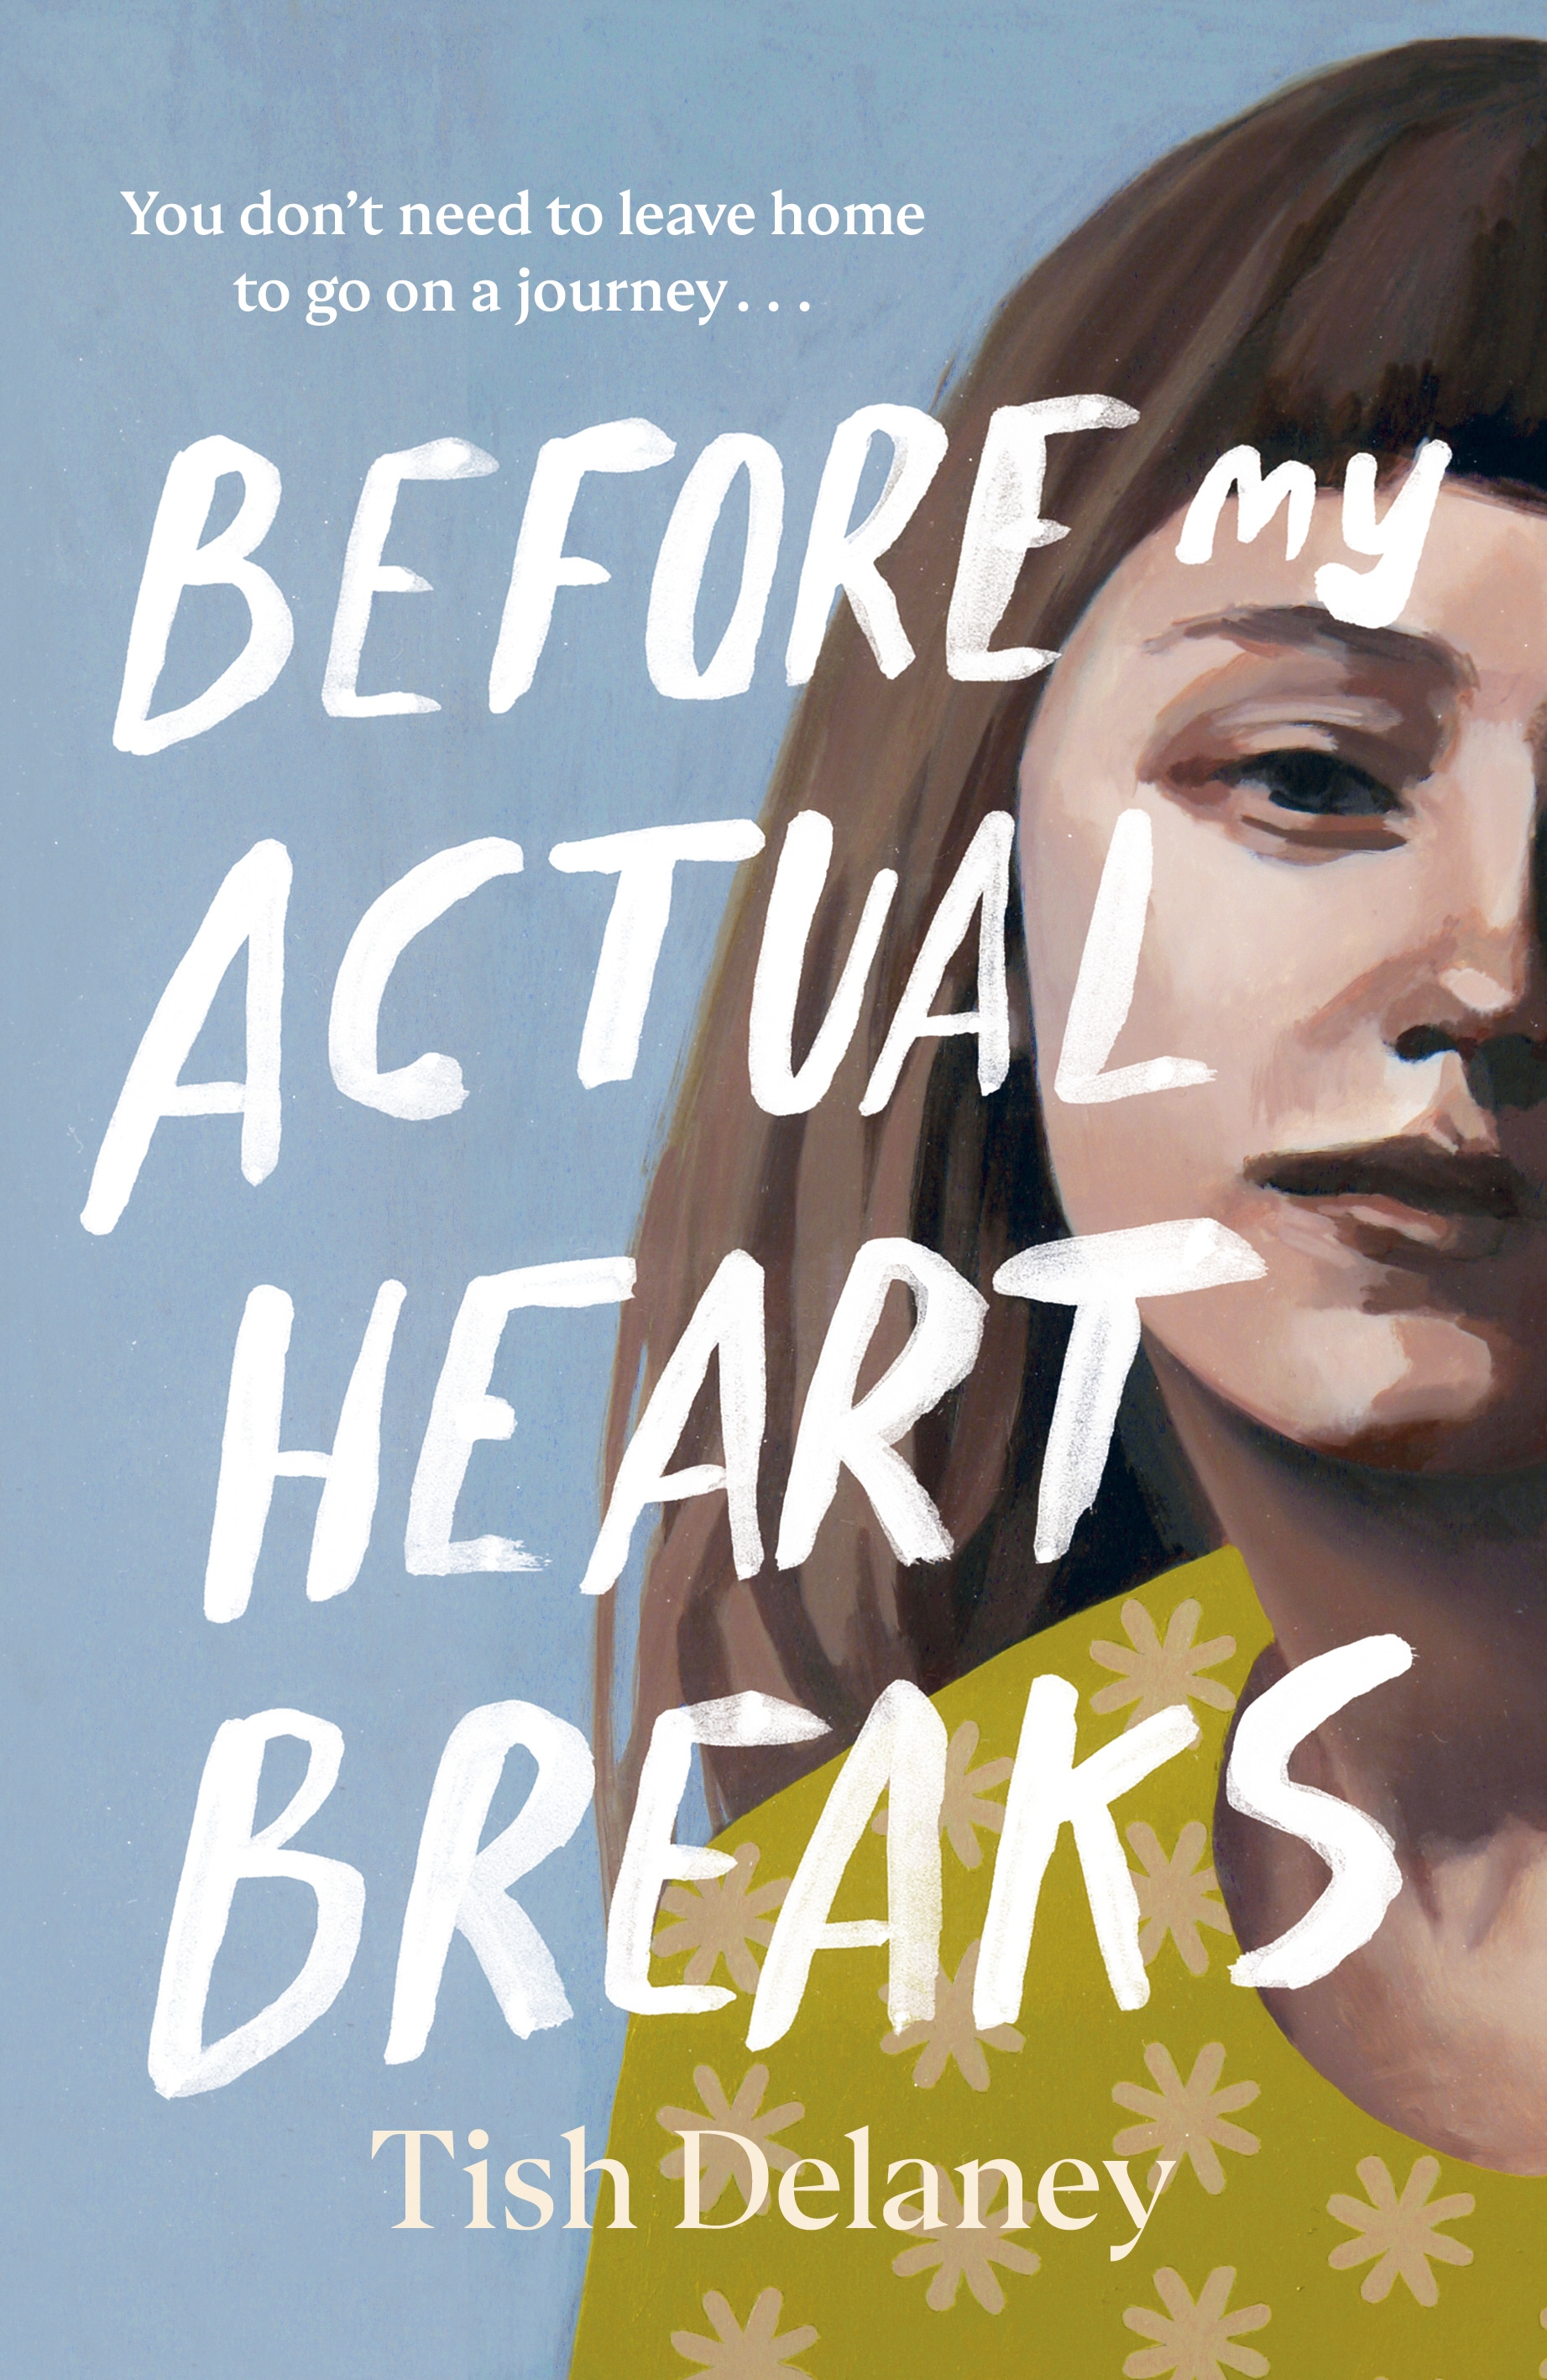 Book “Before My Actual Heart Breaks” by Tish Delaney — February 18, 2021